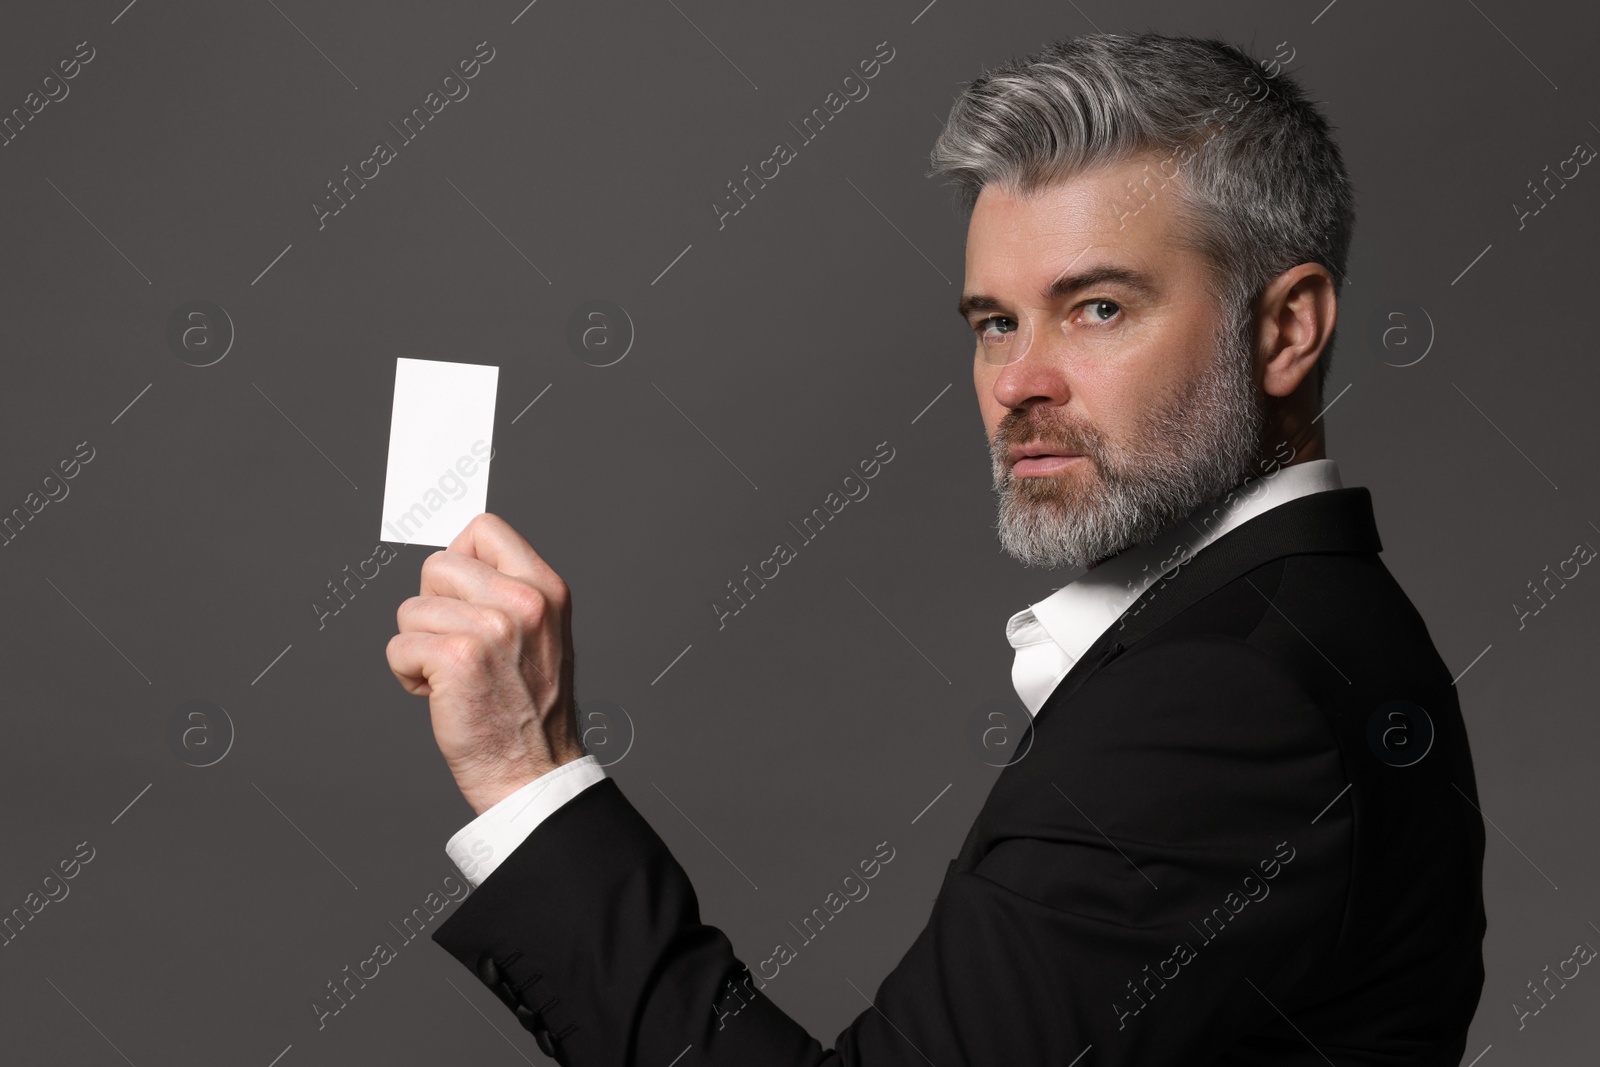 Photo of Handsome businessman holding blank business card on grey background